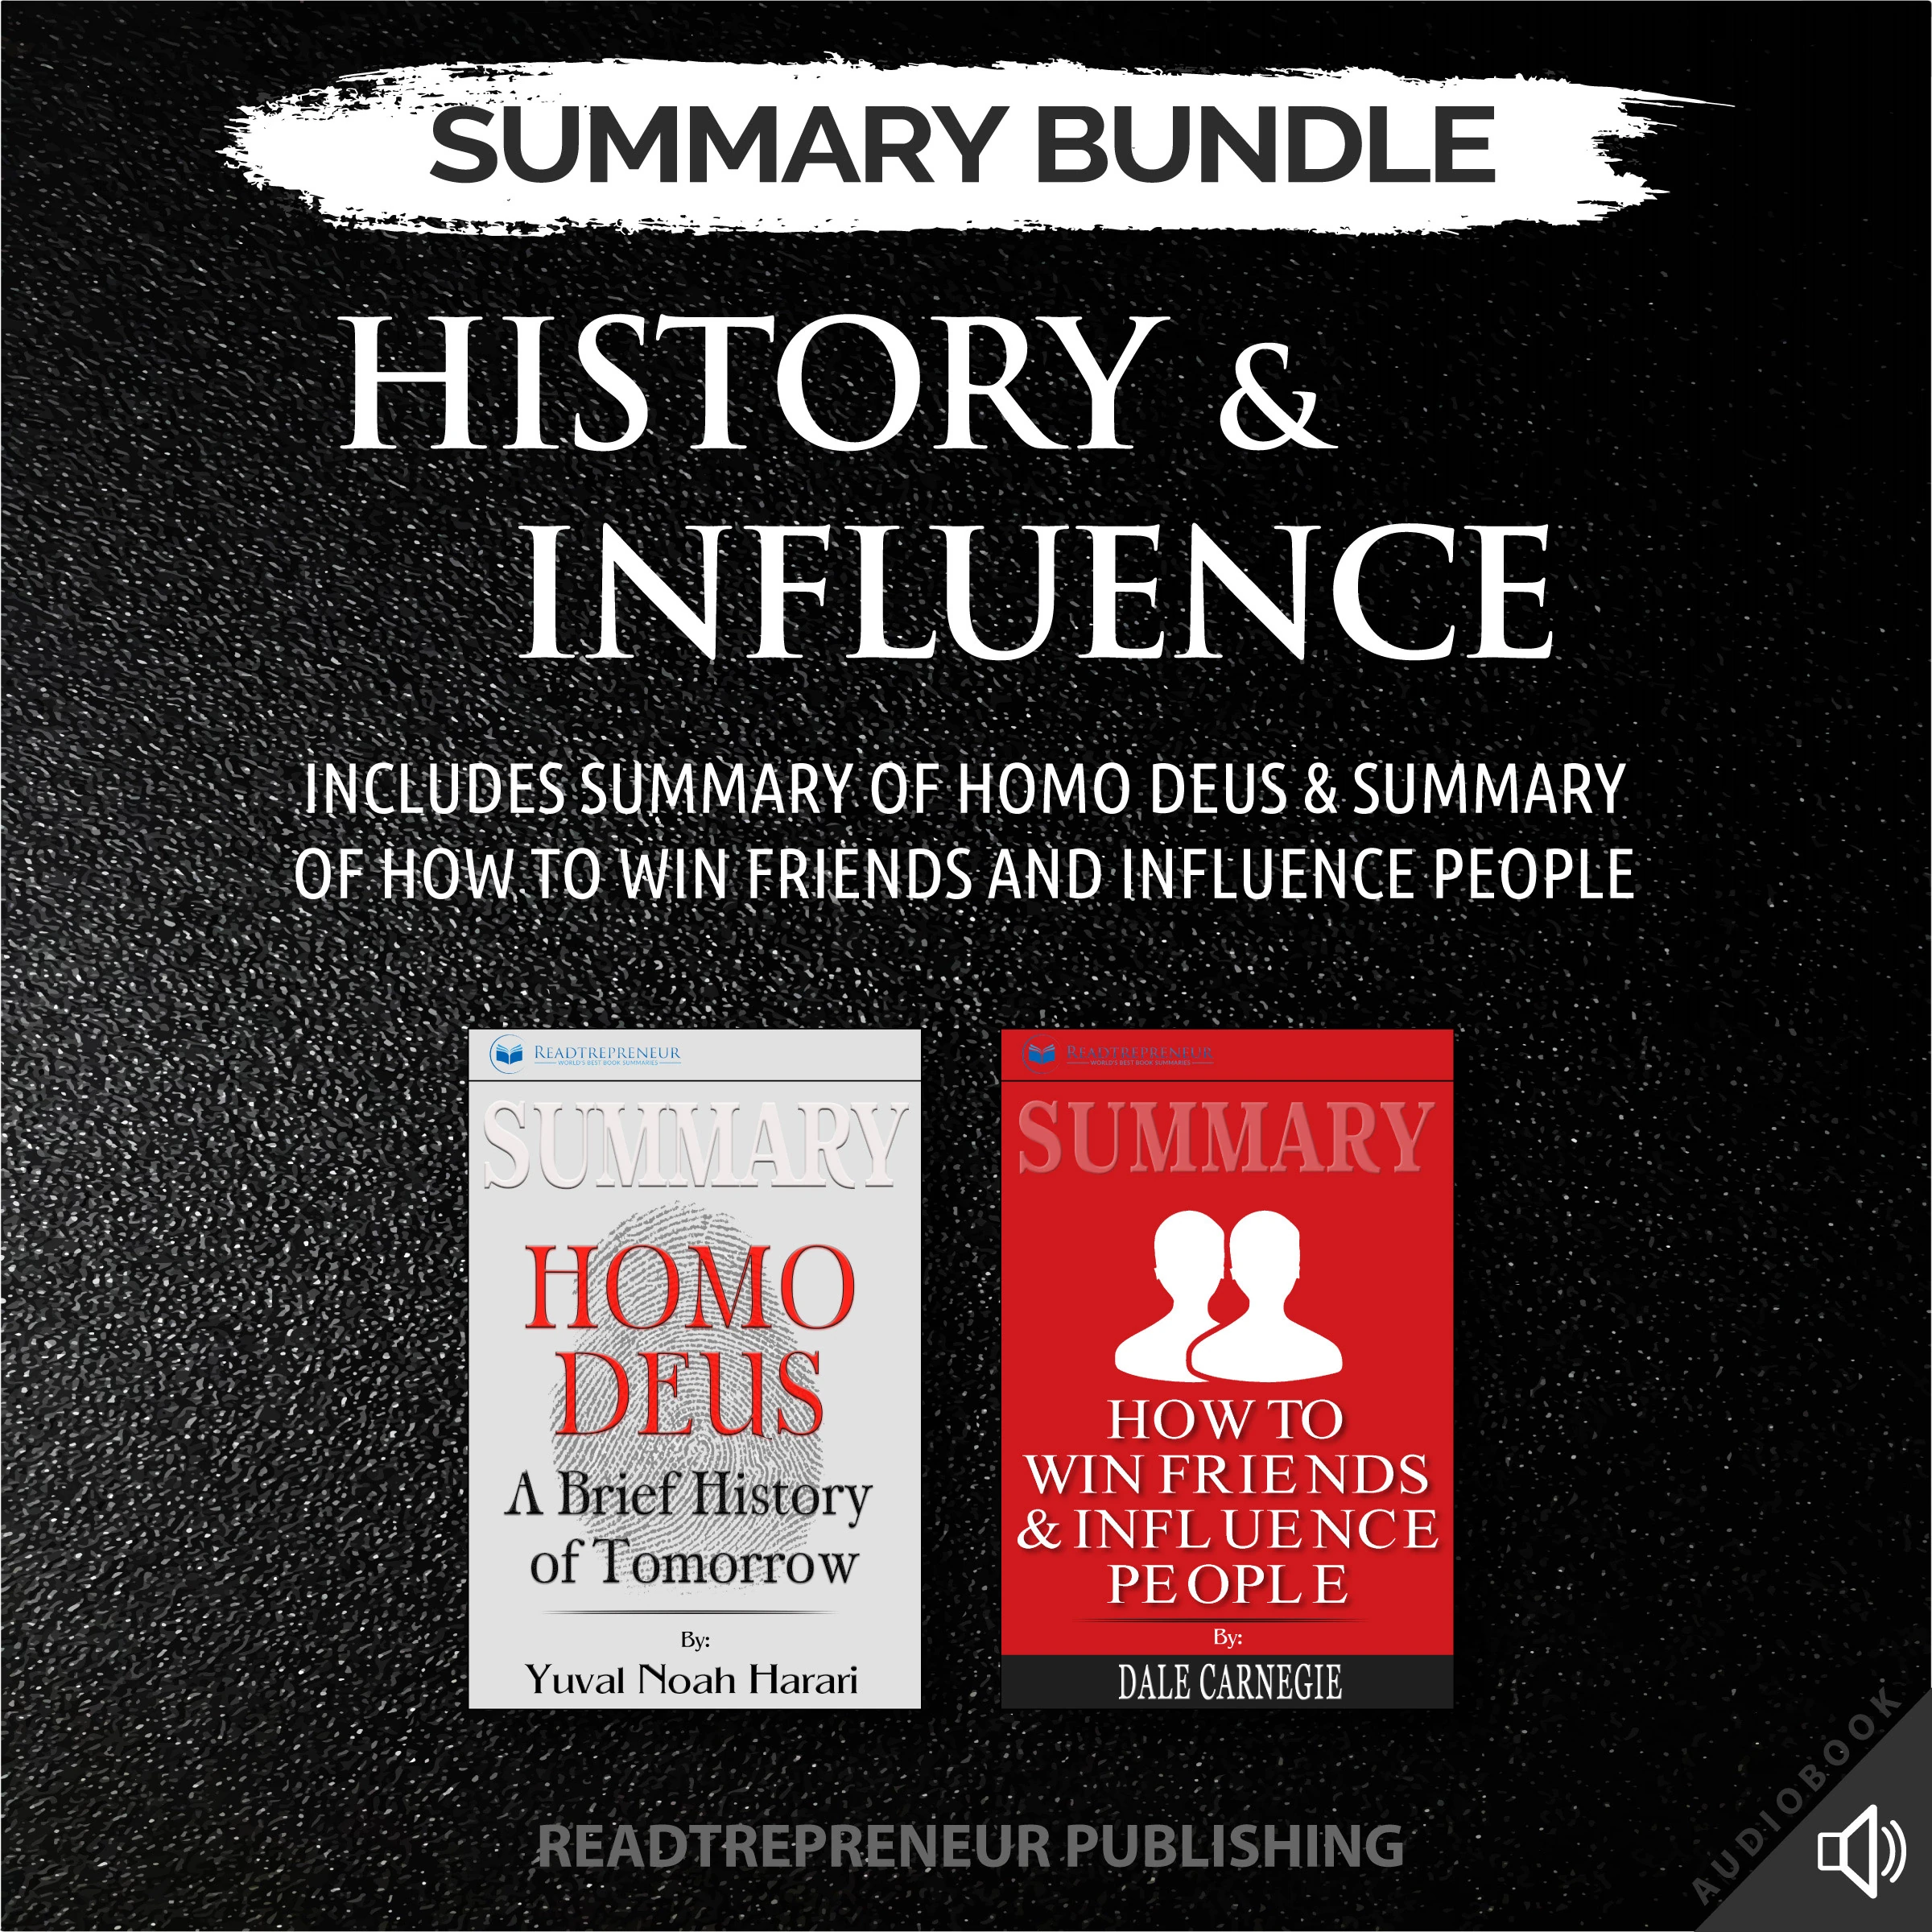 Summary Bundle: History & Influence | Readtrepreneur Publishing: Includes Summary of Homo Deus & Summary of How to Win Friends and Influence People Audiobook by Readtrepreneur Publishing